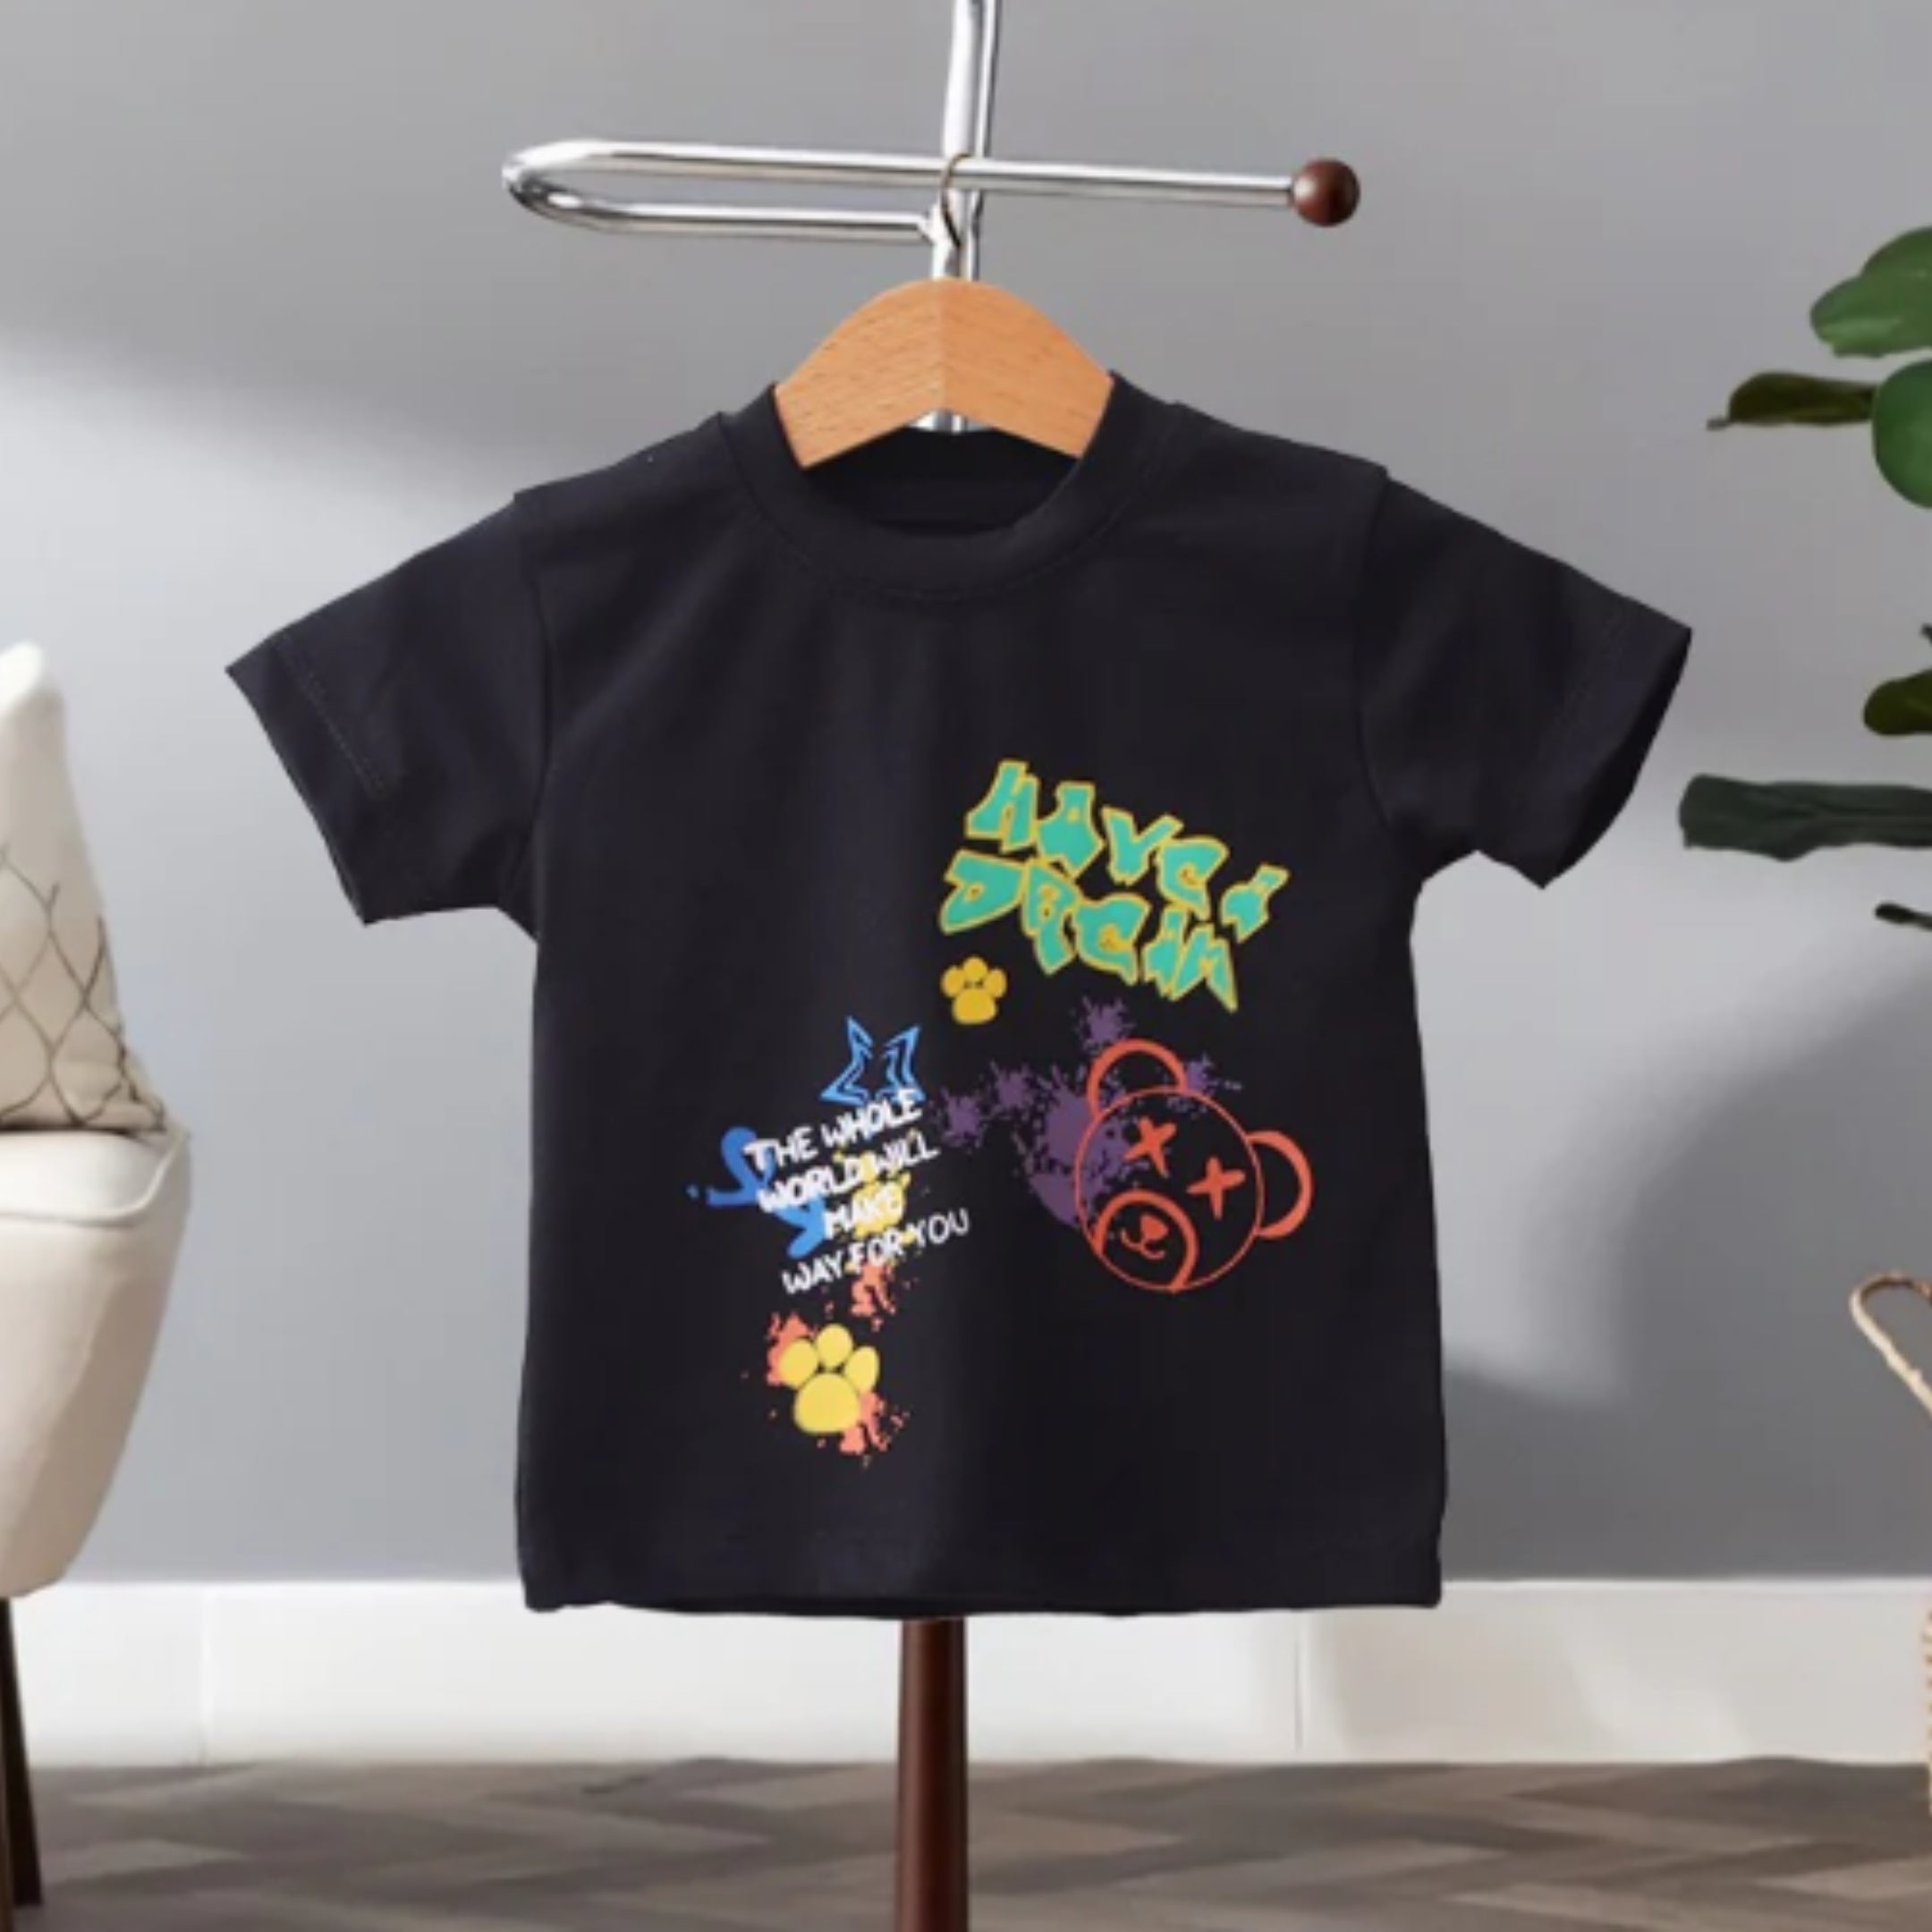 Printed Black T-Shirt And Shorts For Kids